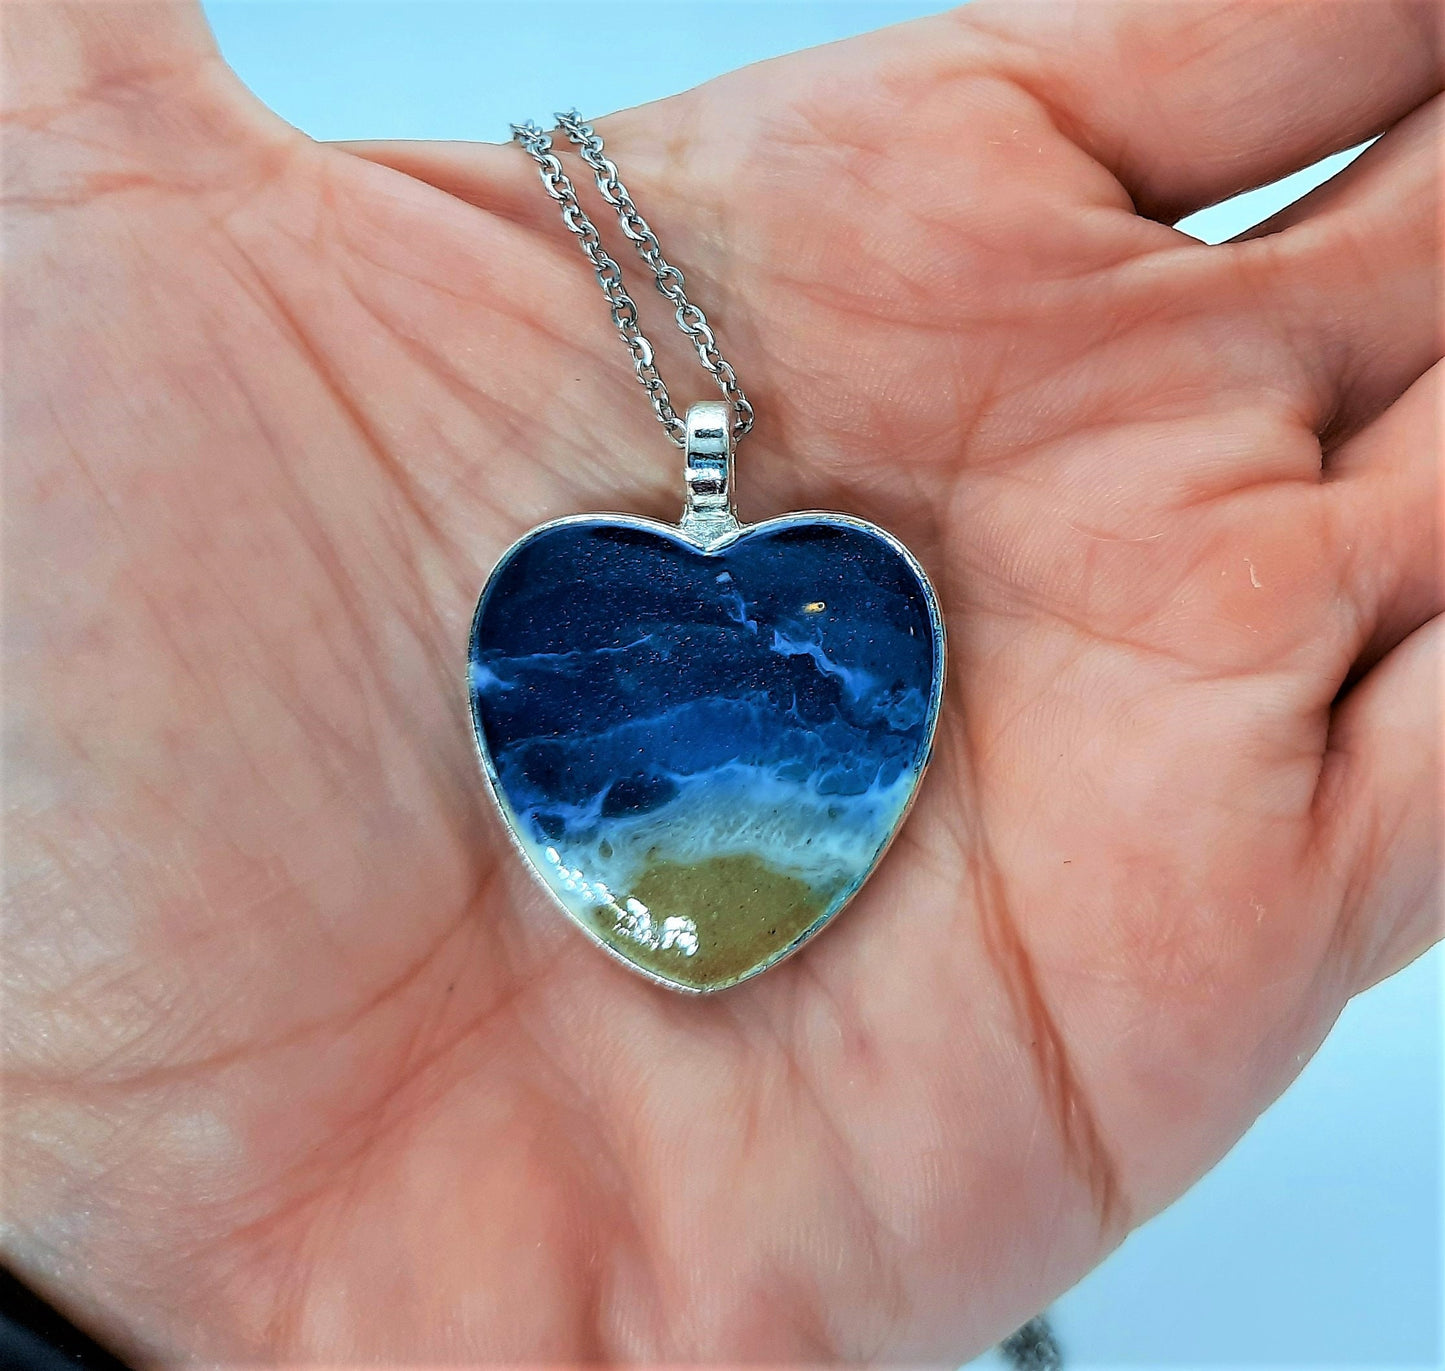 Resin Waves / Heart Shaped Ocean Earring and Necklace Set / Beach Scene / Made with Sand, Resin, Mica, & Hypoallergenic Stainless Steel